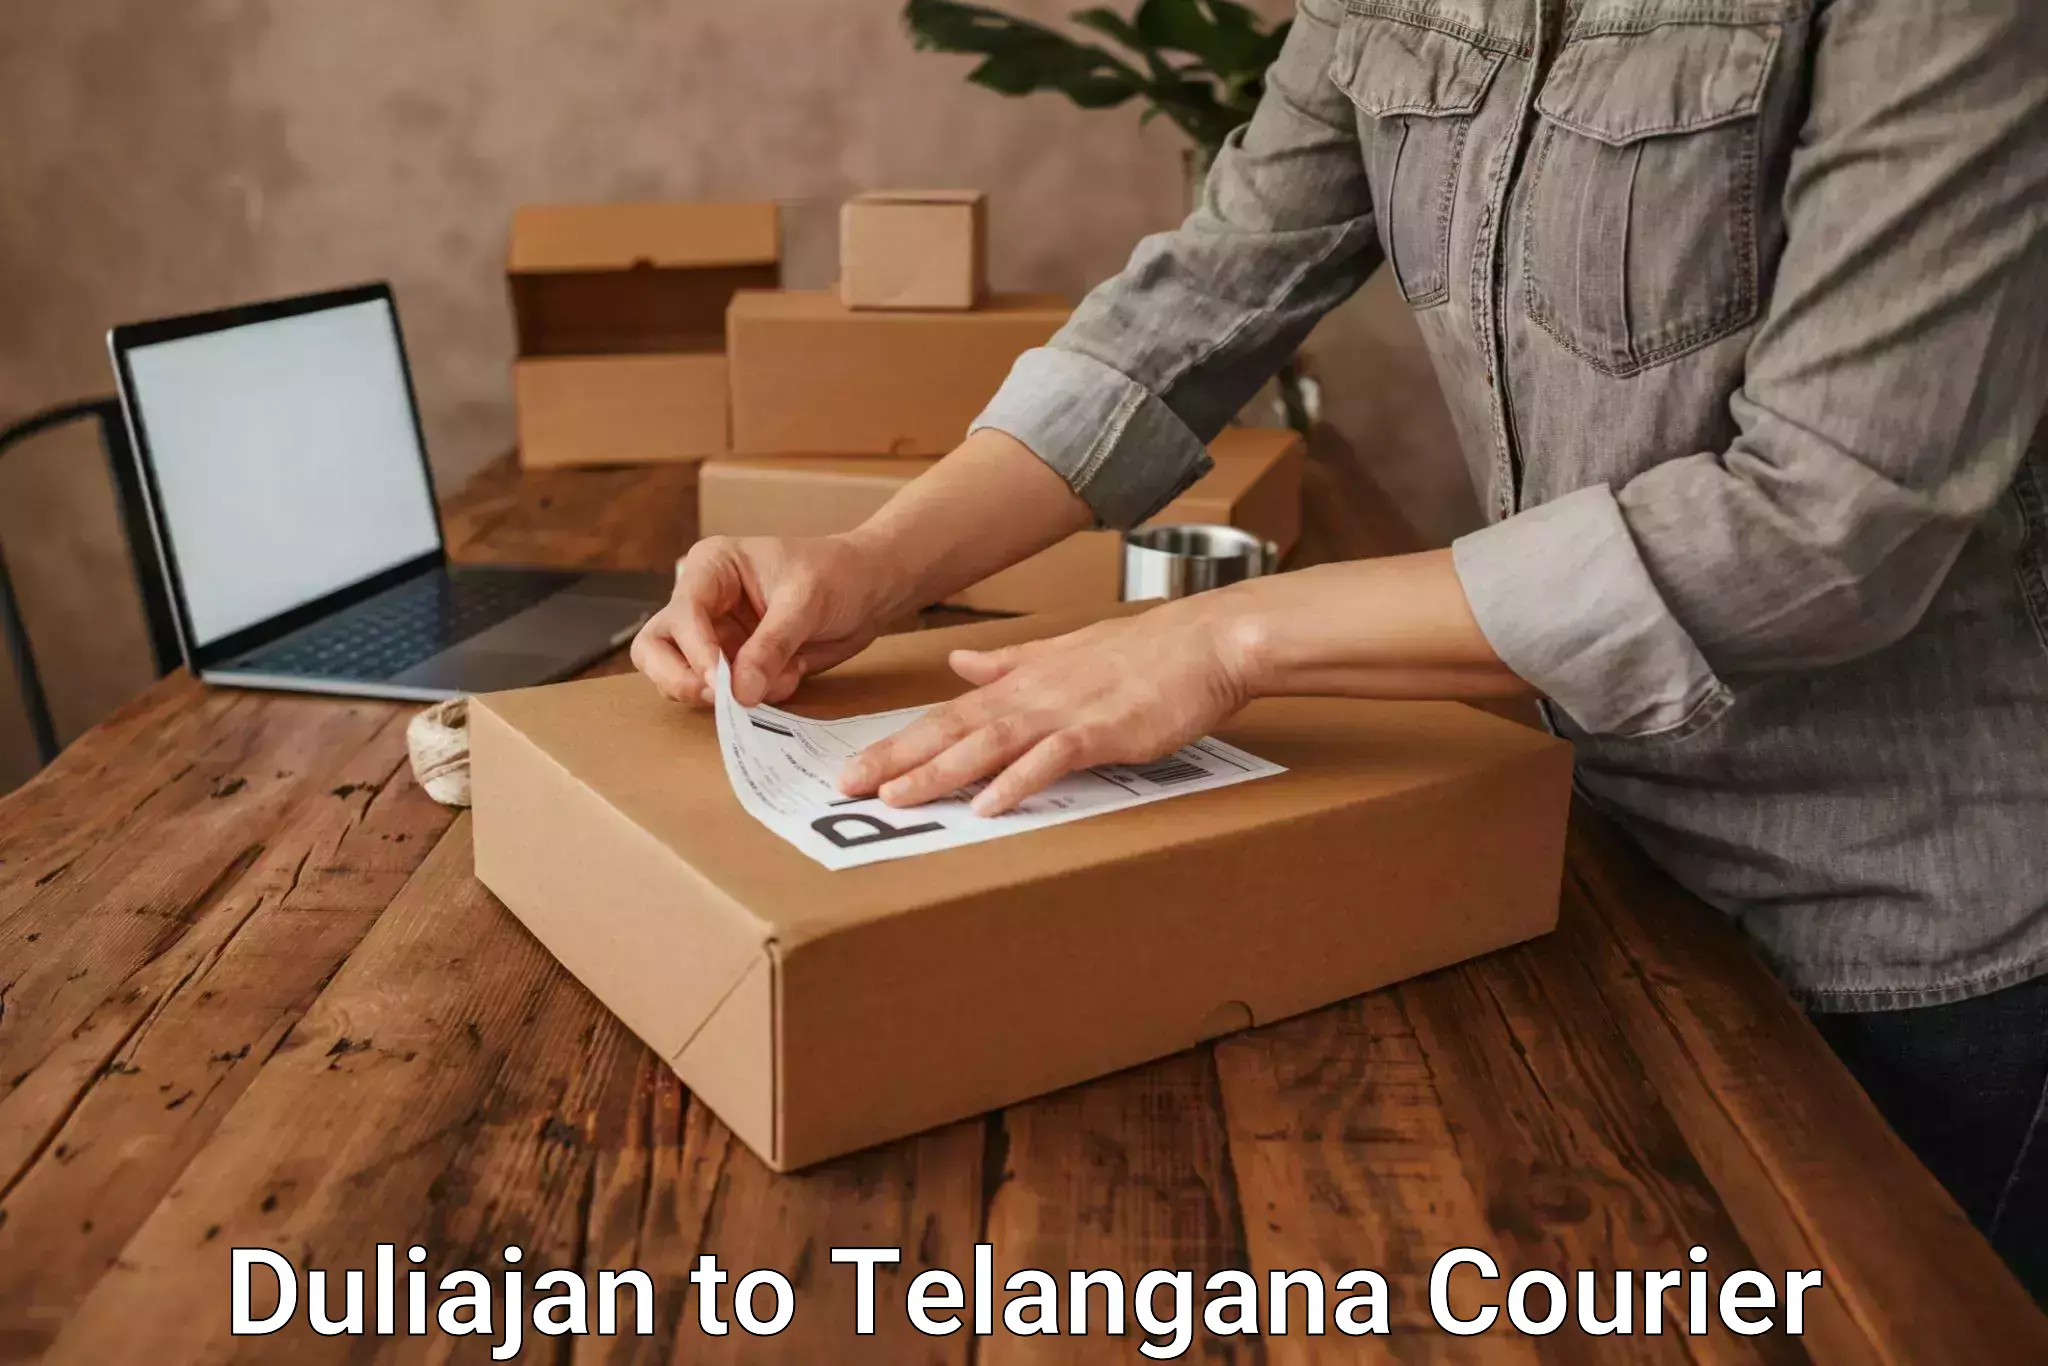 User-friendly delivery service Duliajan to Bhupalpally